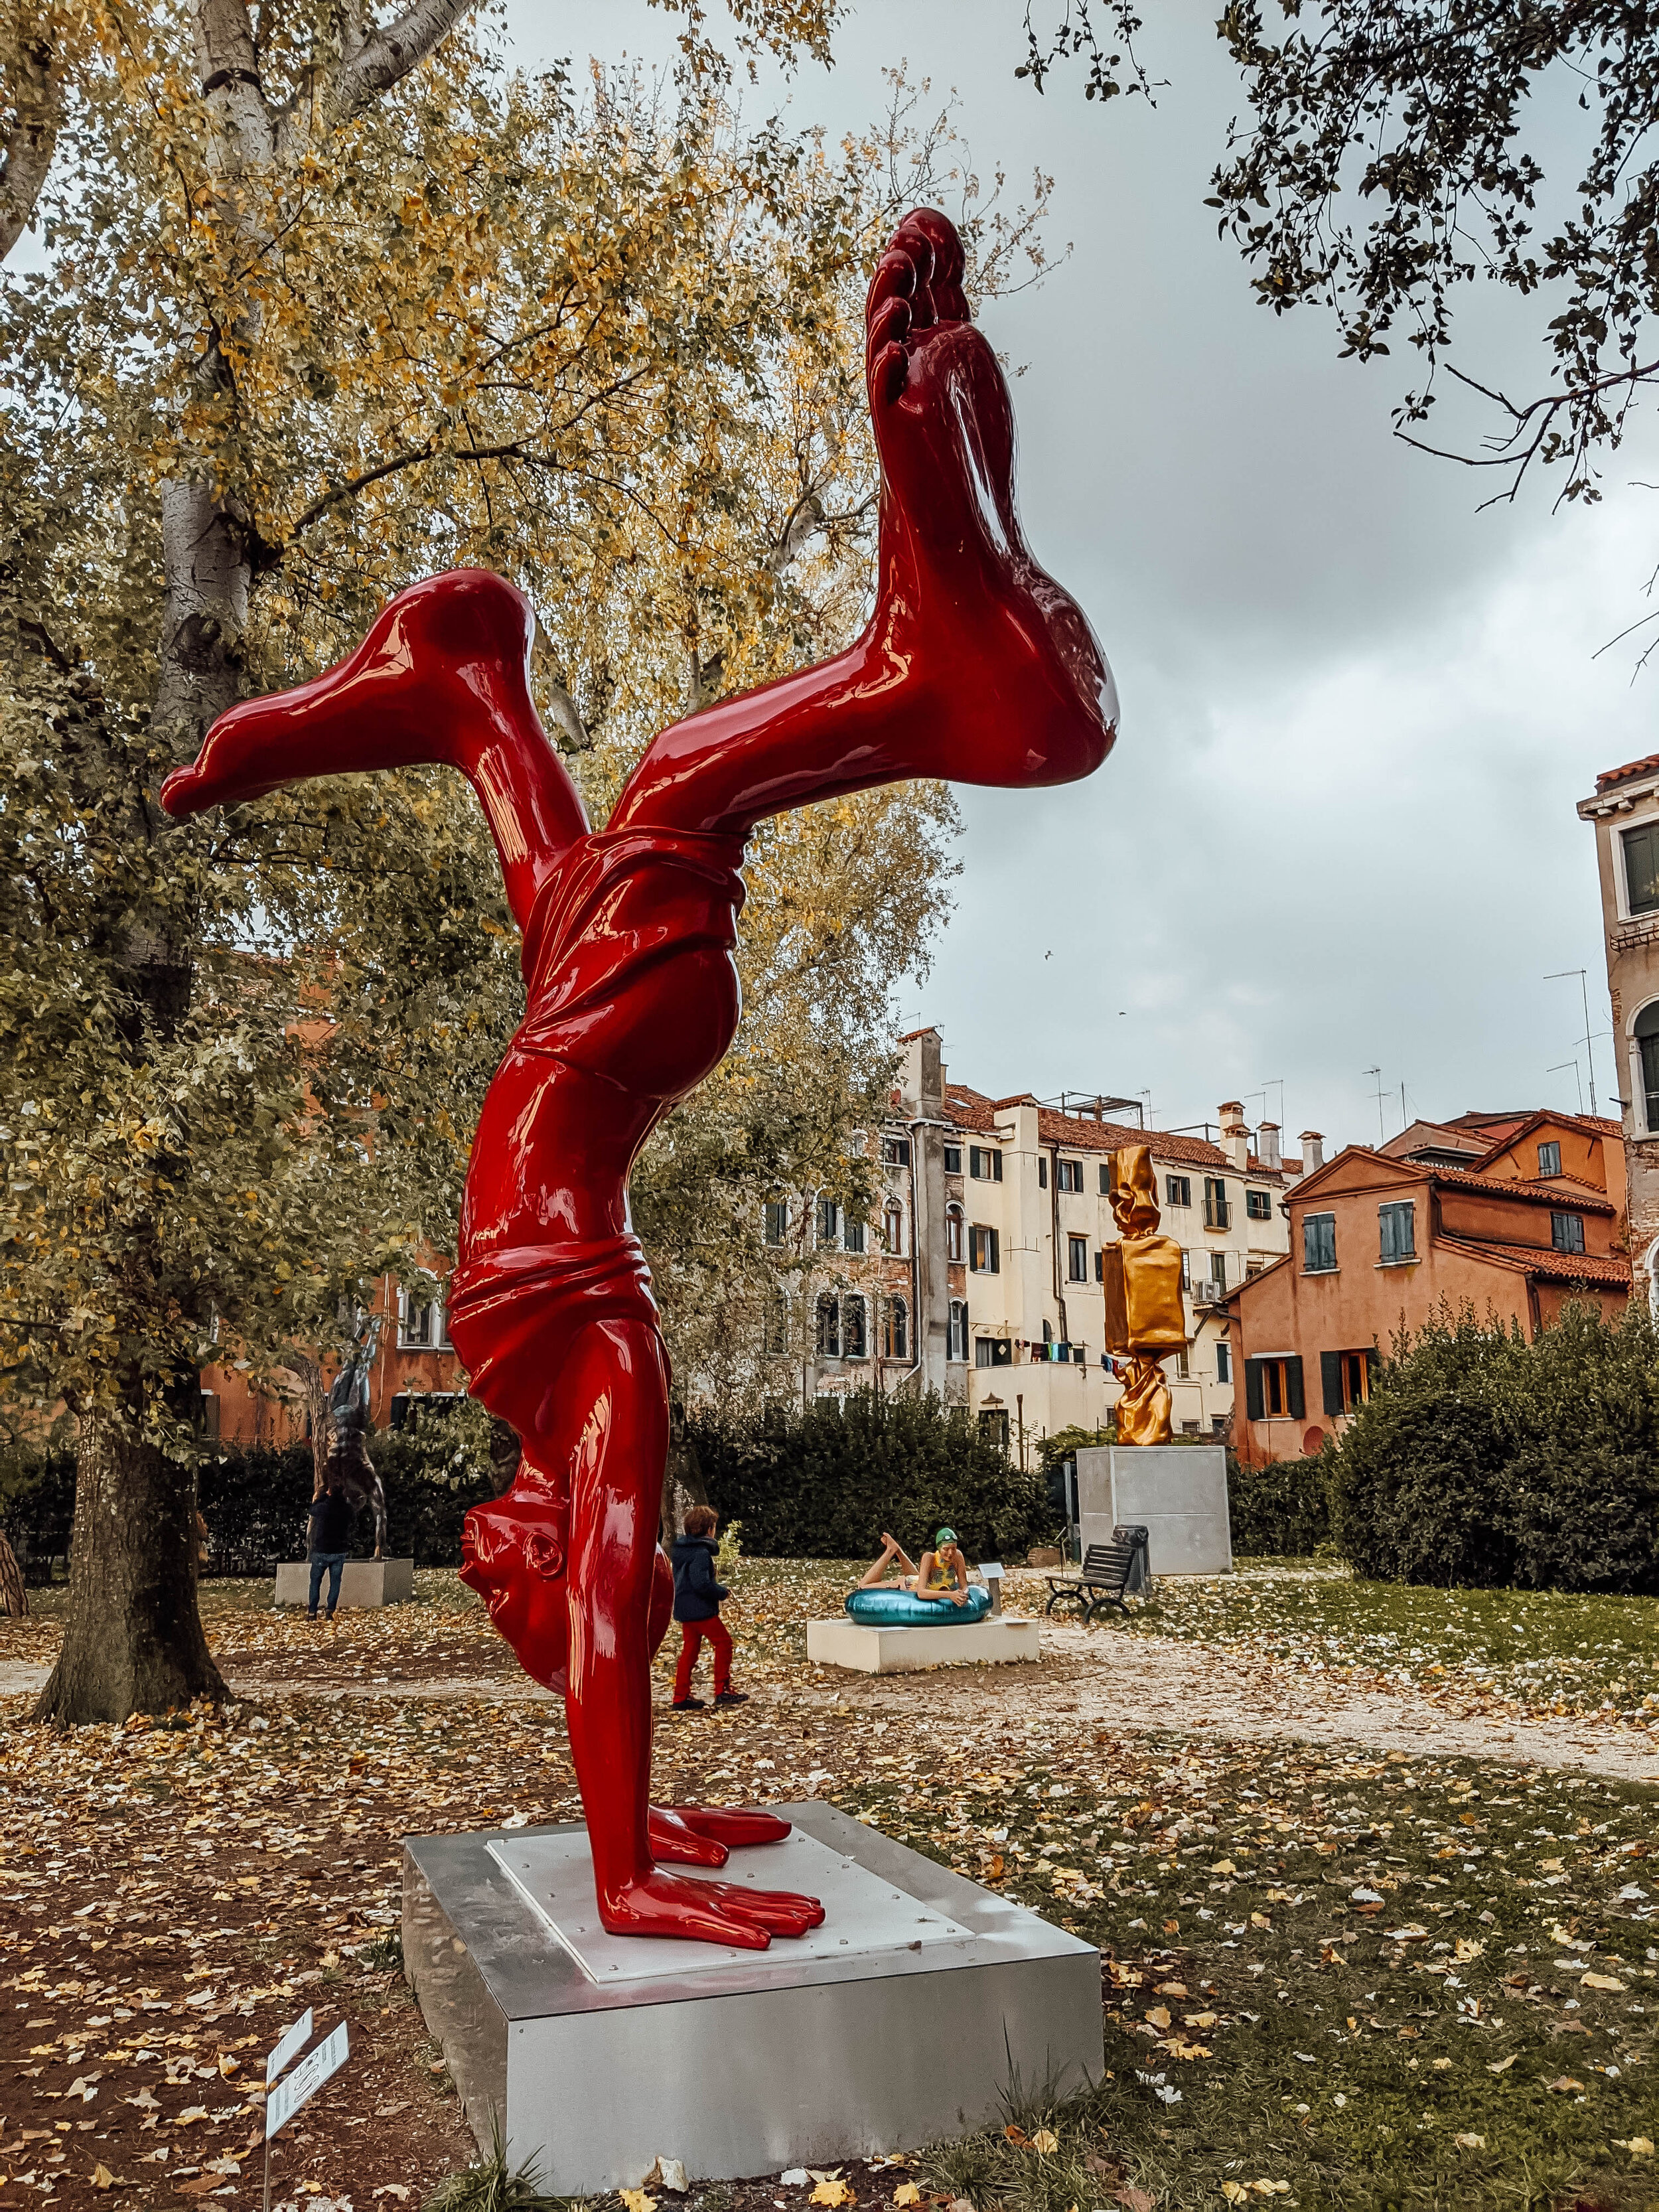 Park with public art in Venice, Italy